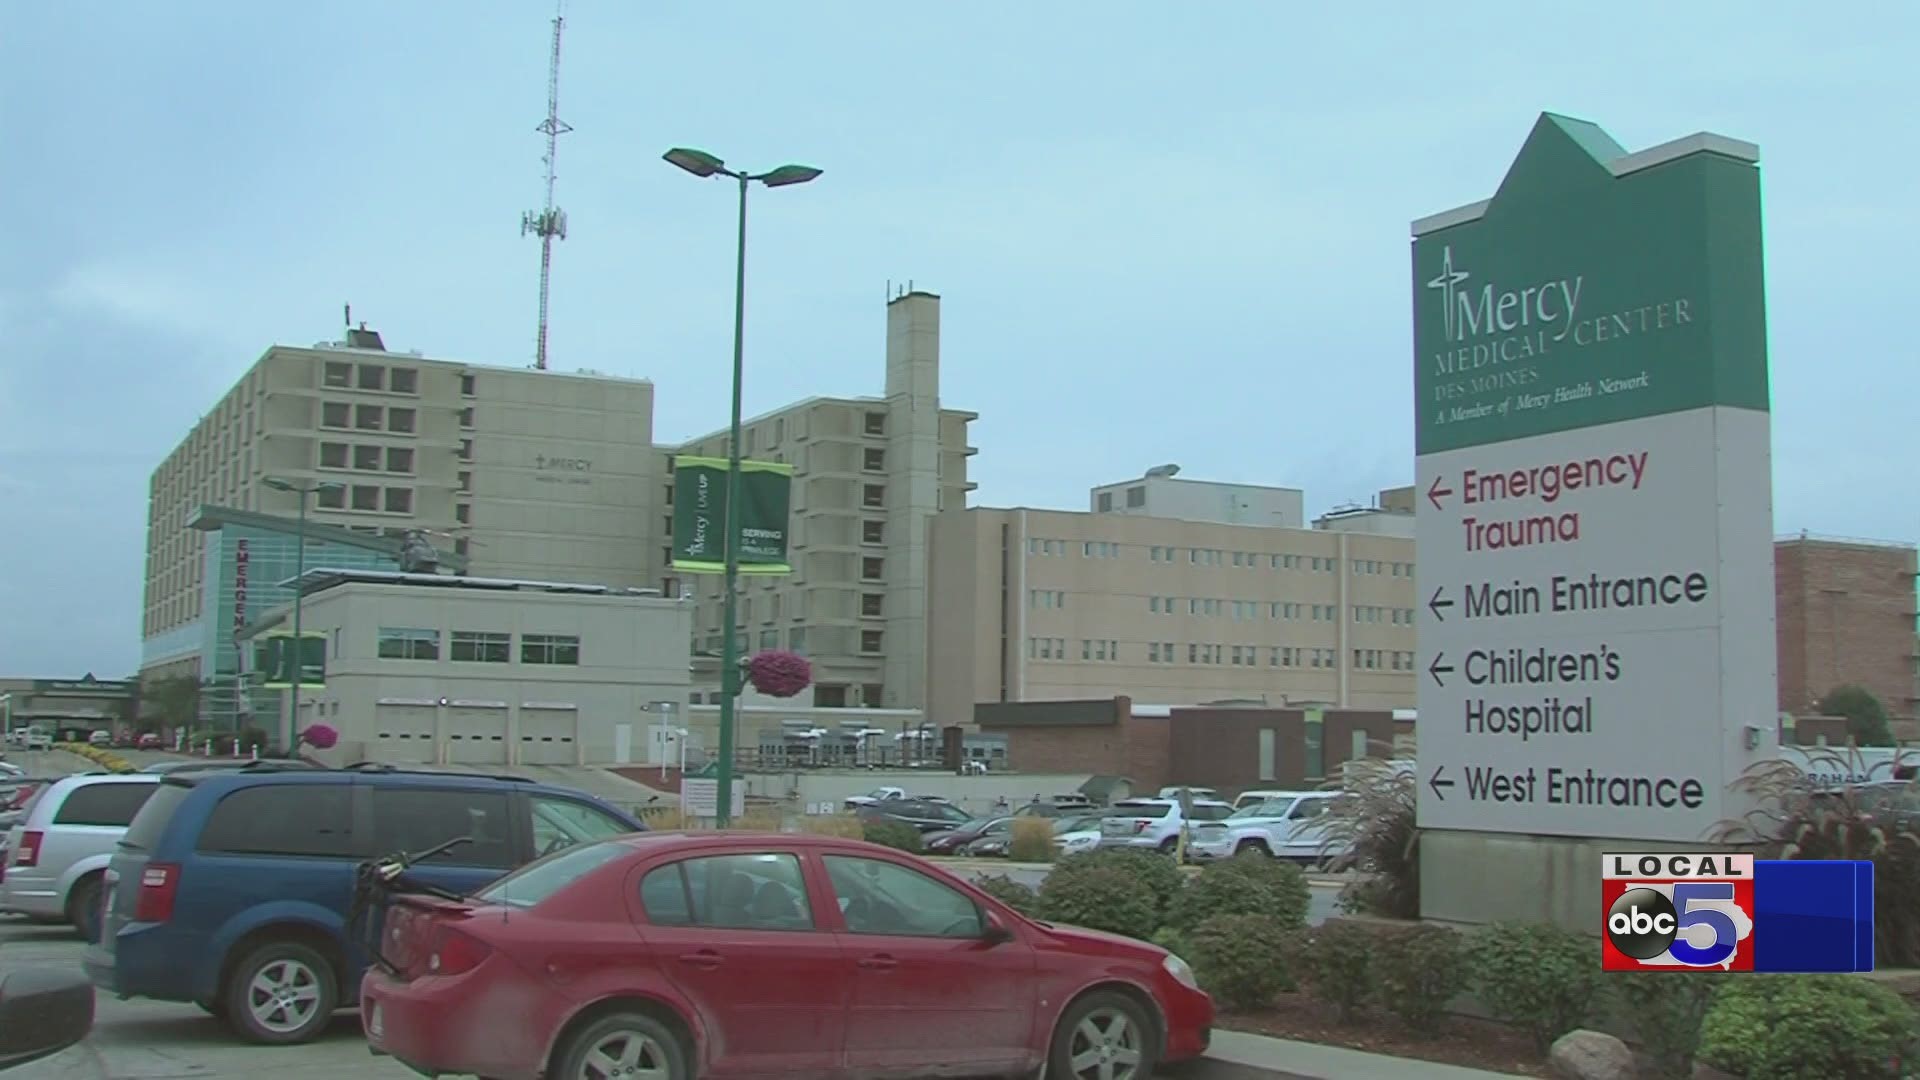 Report: Iowa hospitals will lose $1.2 billion because of COVID-19 by the end of June